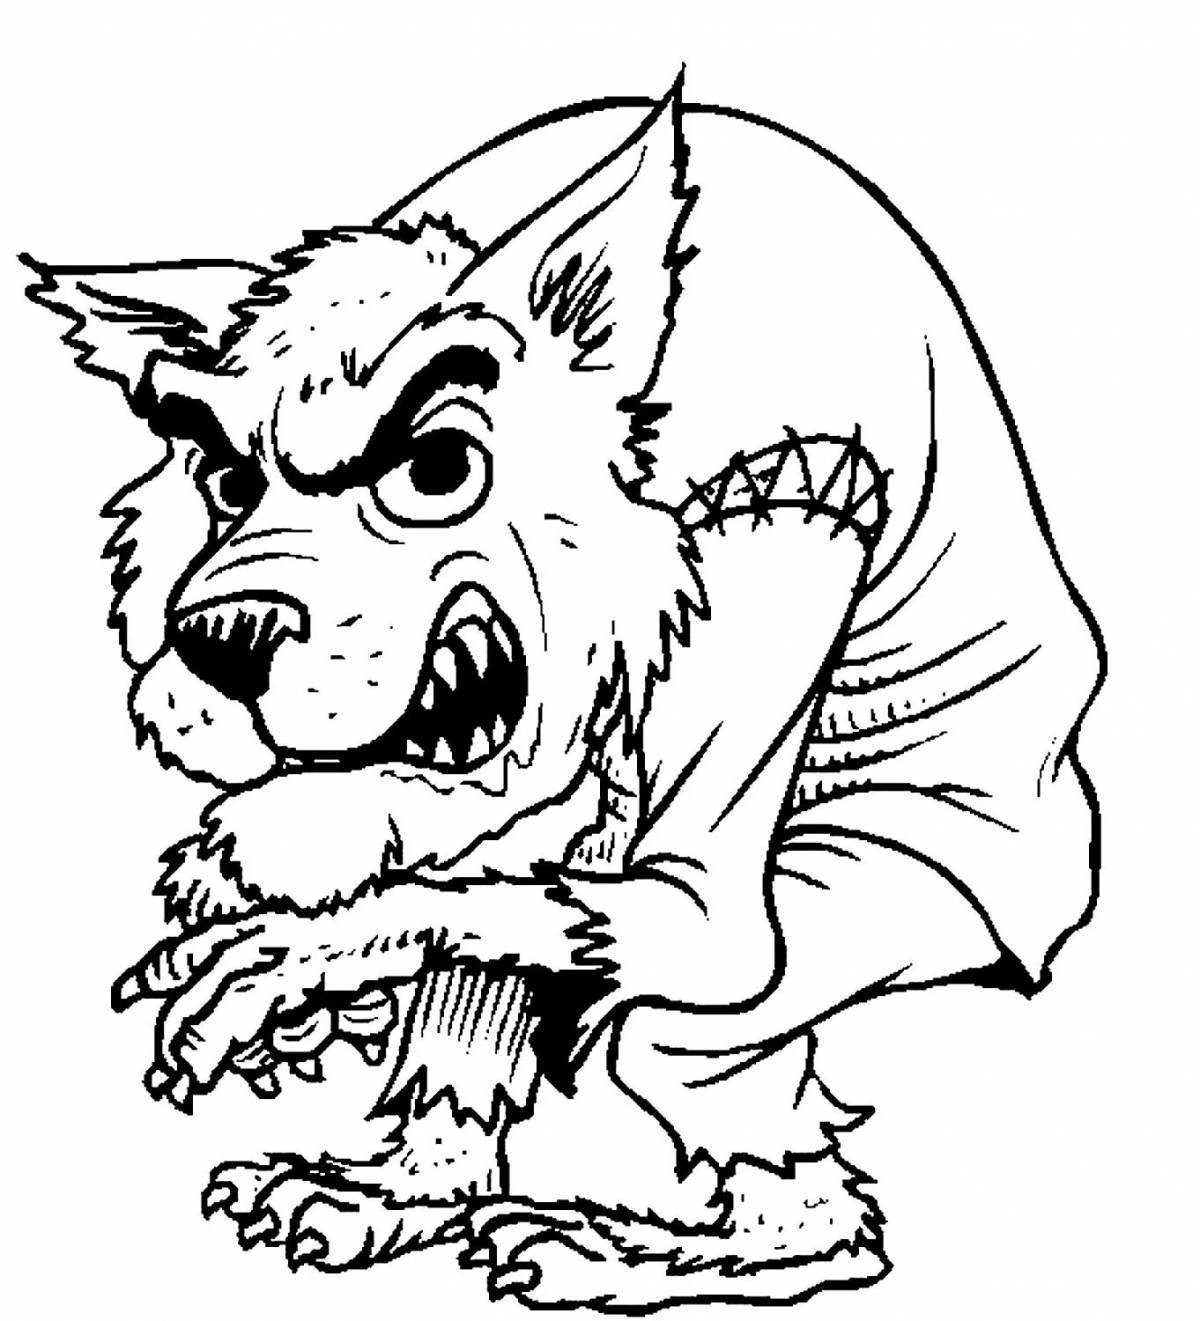 Chilling werewolf coloring page for kids